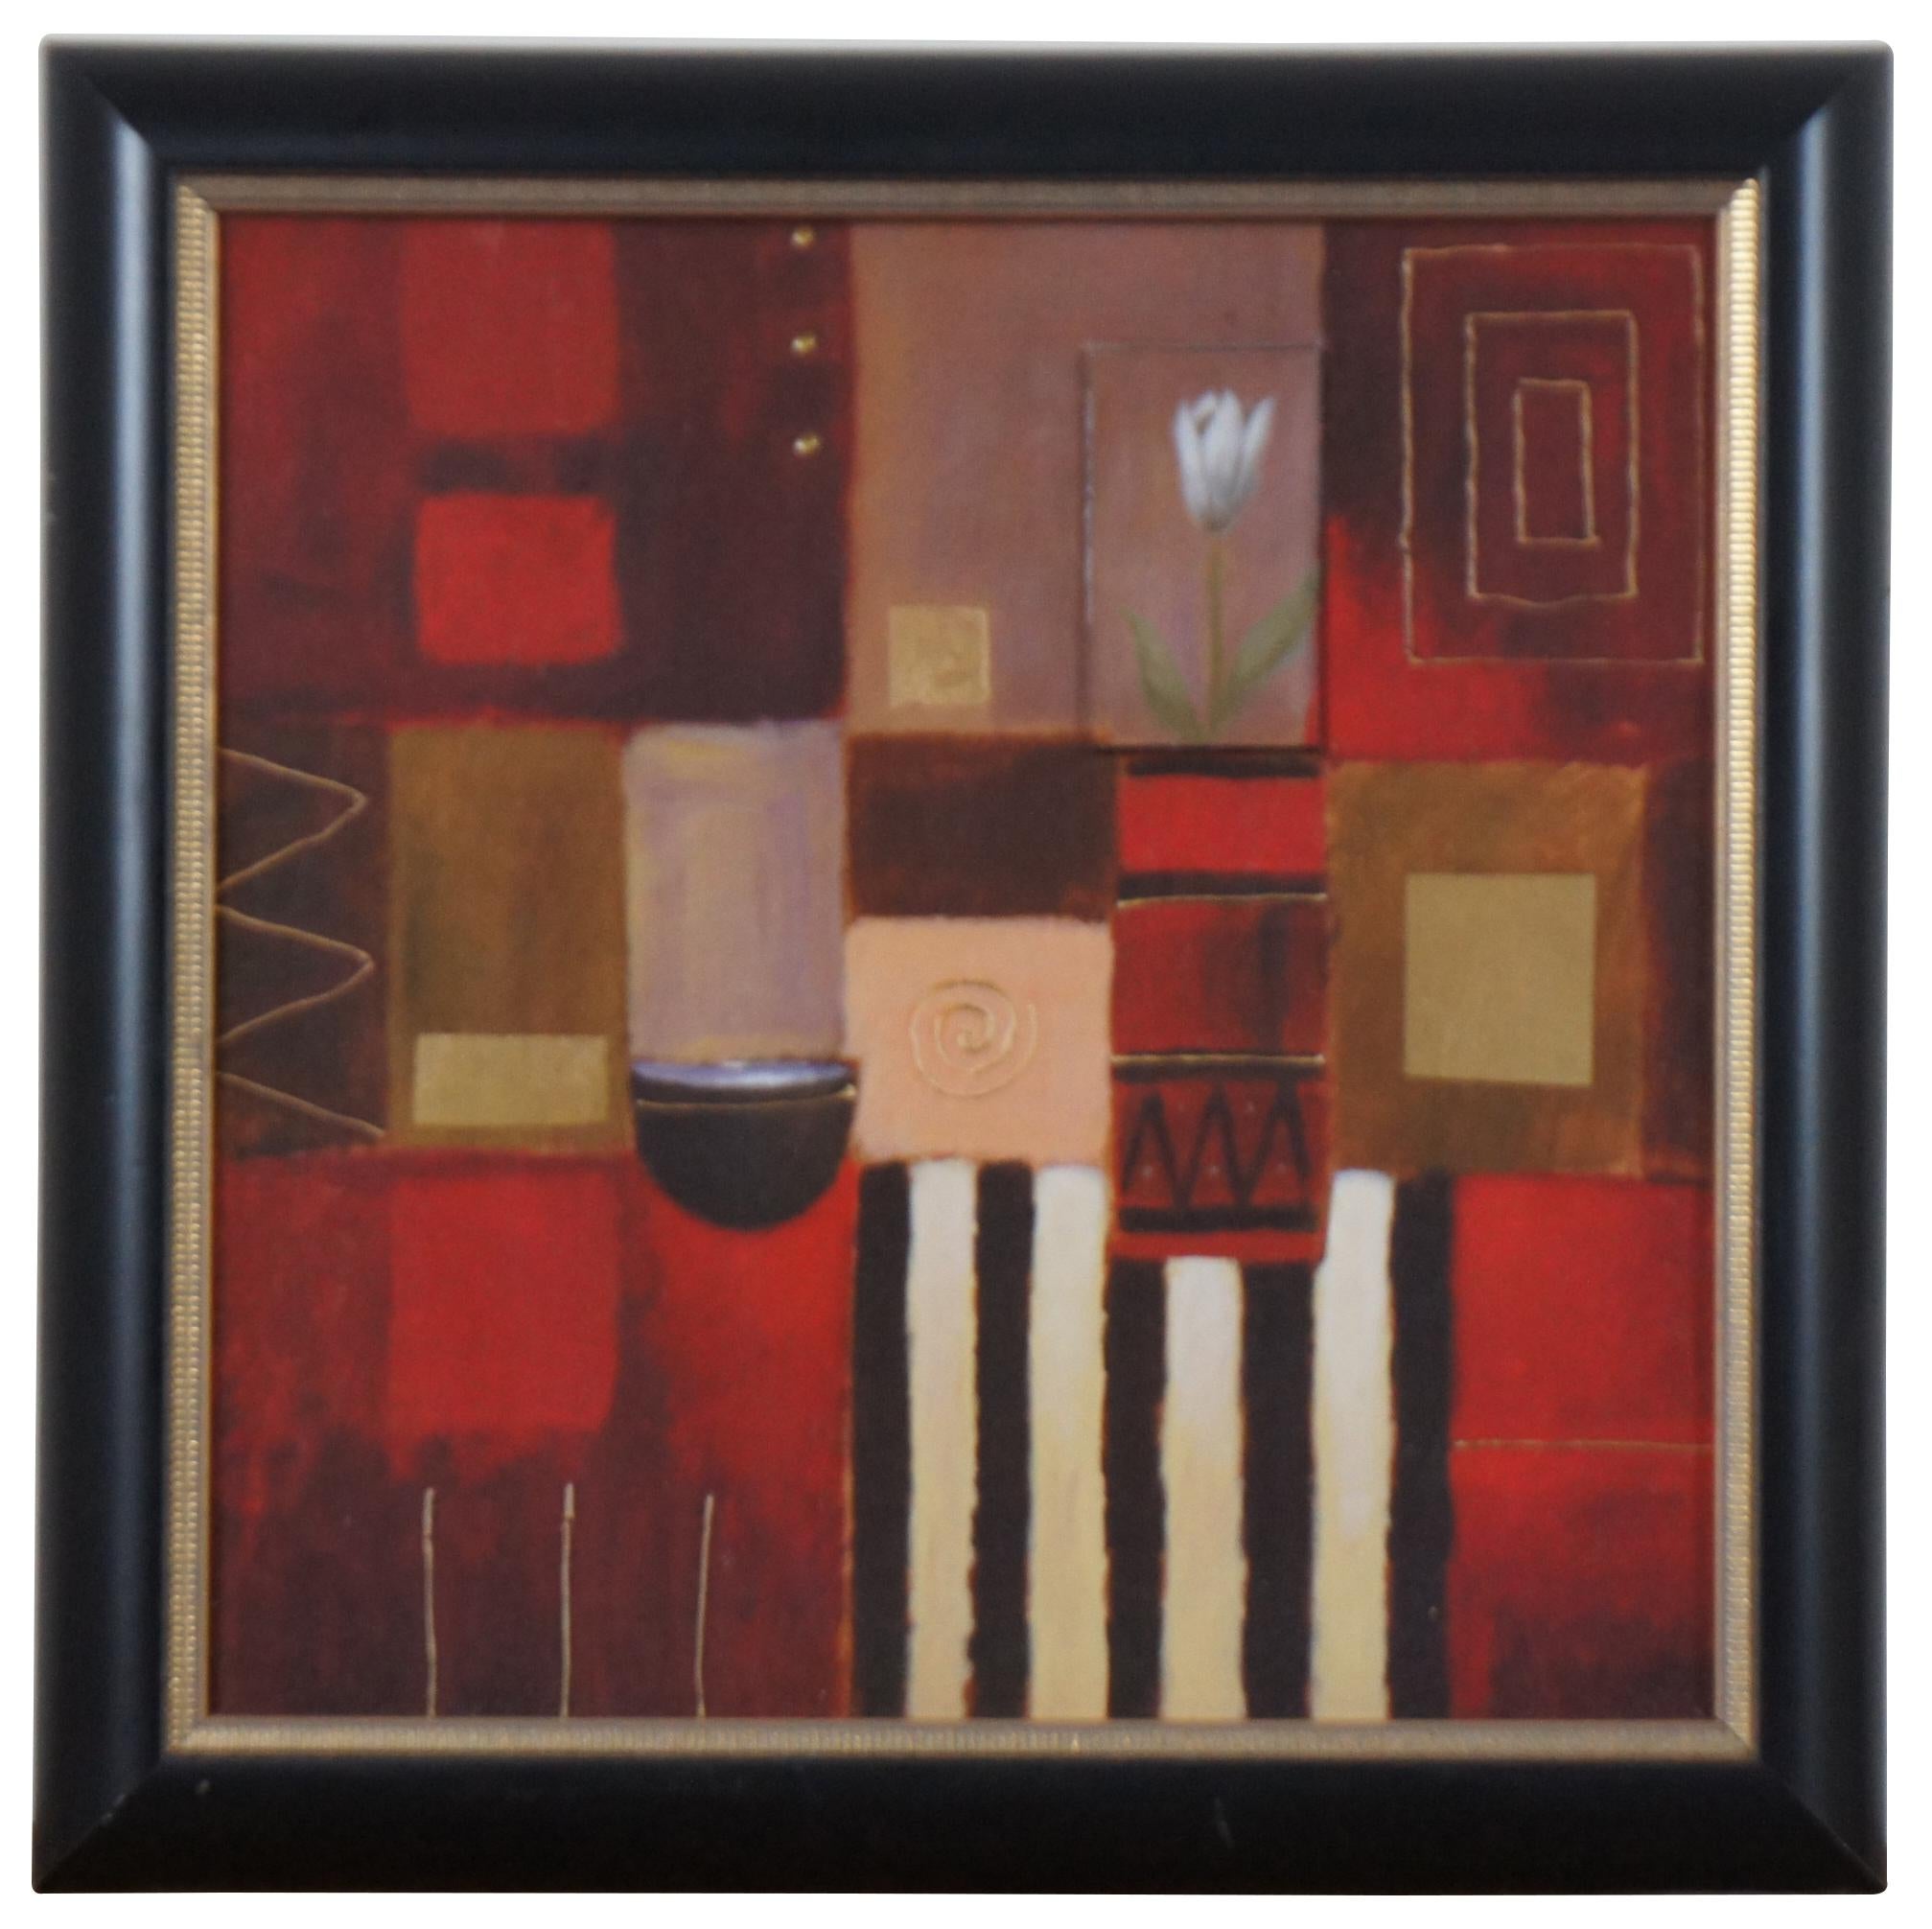 Pair of red, black, and gold modern art prints featuring contemporary geometric and collage style designs. Measure: 15